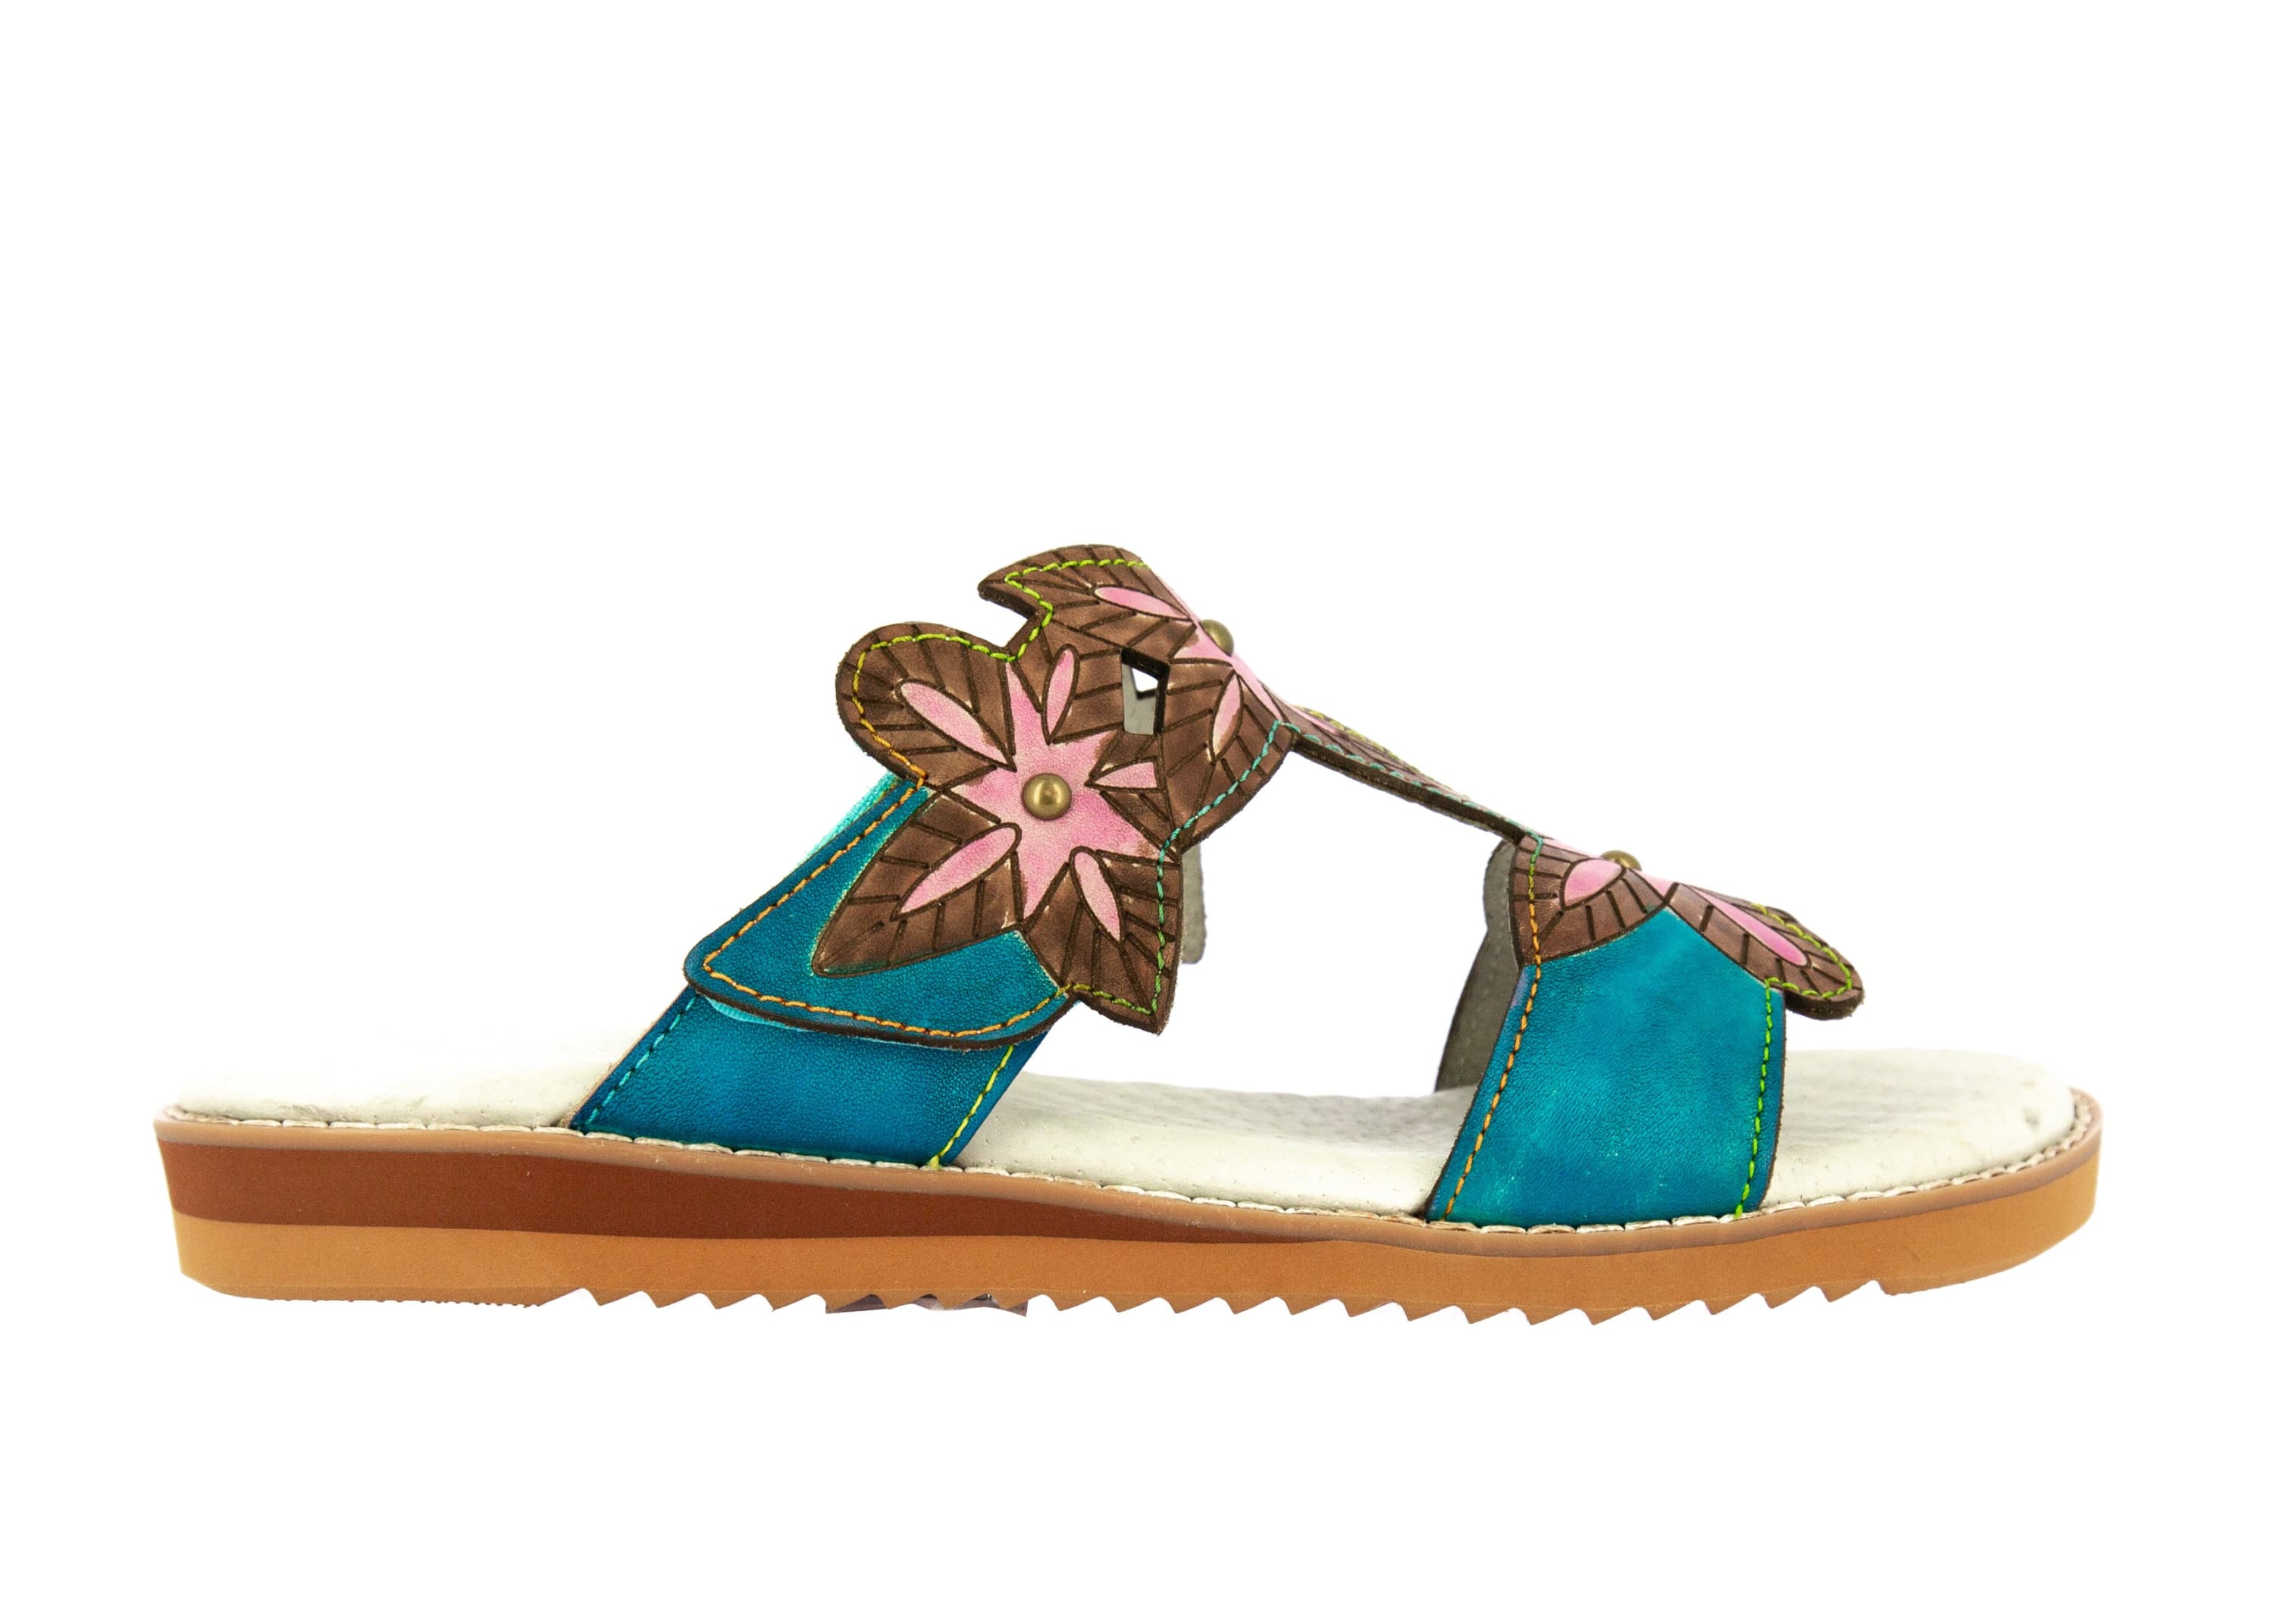 But FECLICIEO11 - 35 / TURQUOISE - Mule